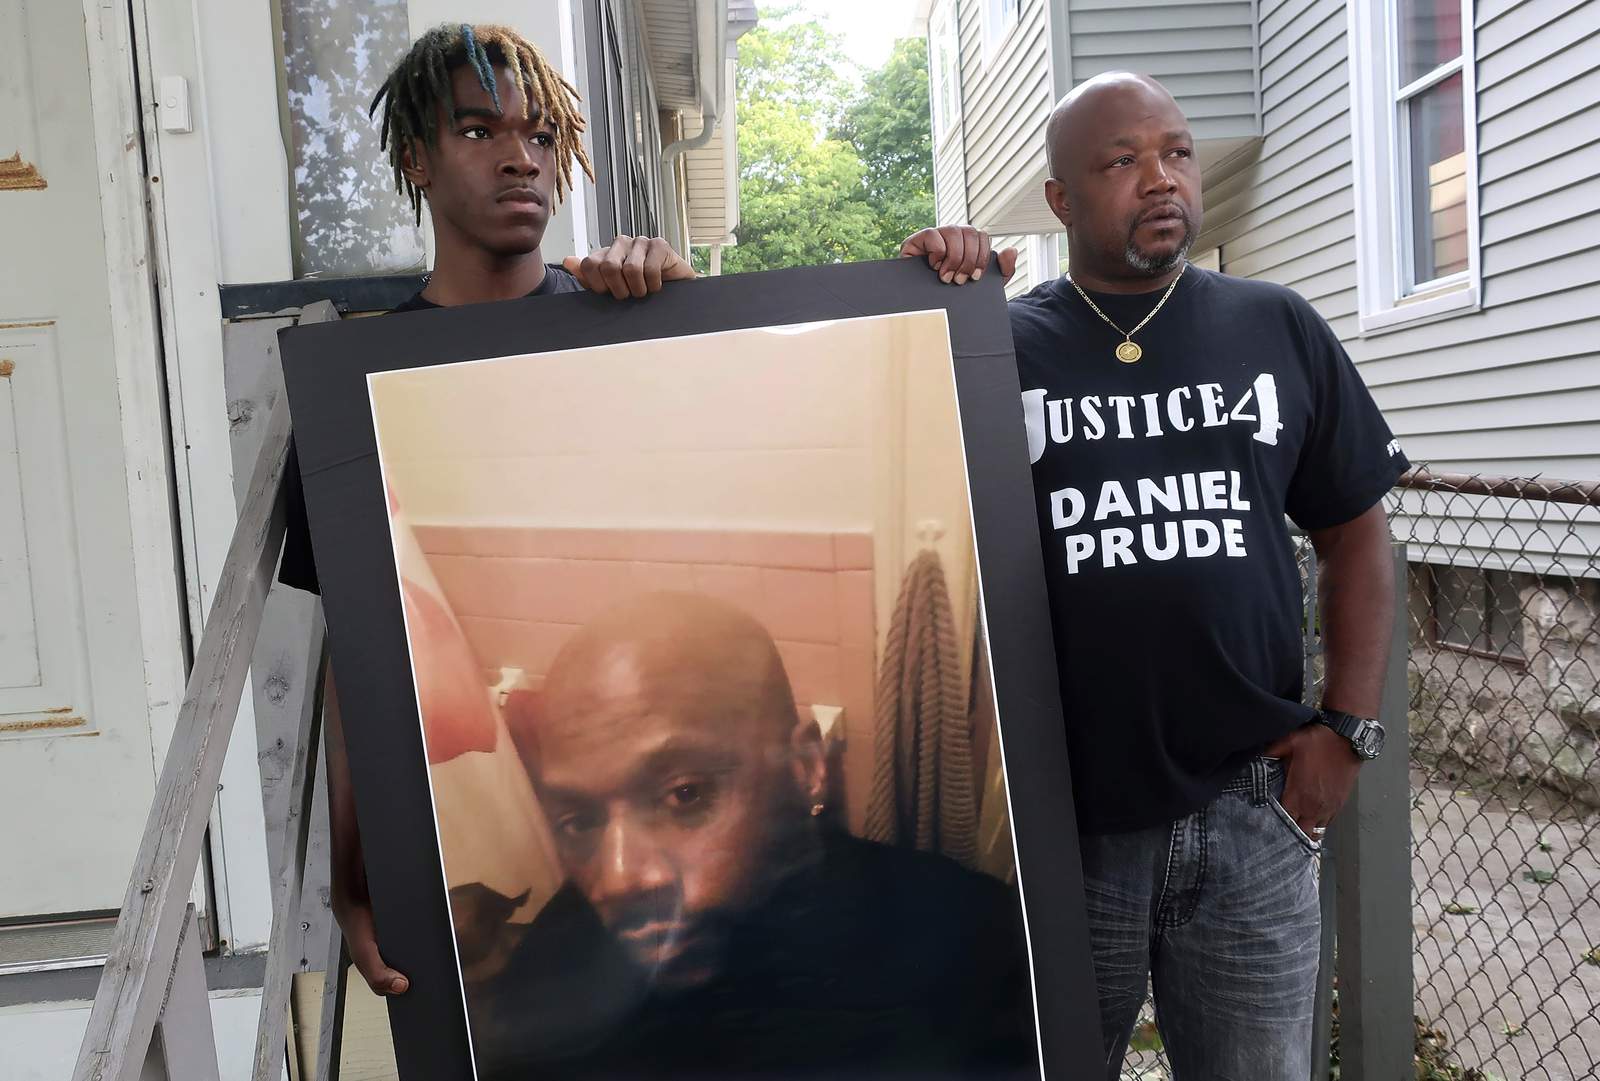 No charges against officers involved in Daniel Prude's death